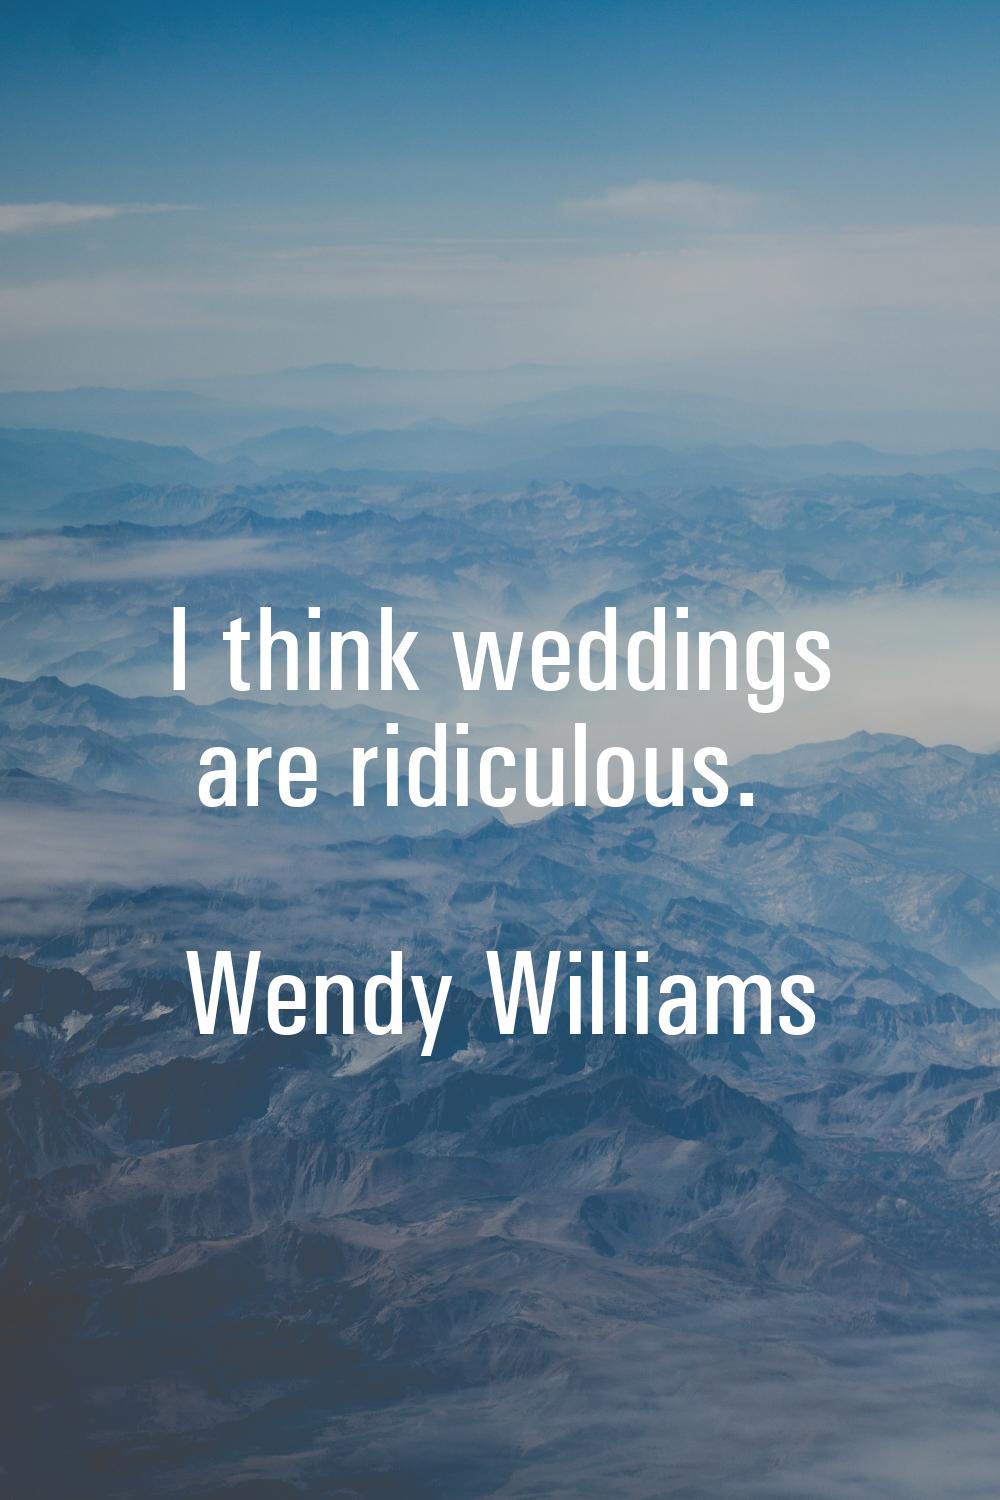 I think weddings are ridiculous.